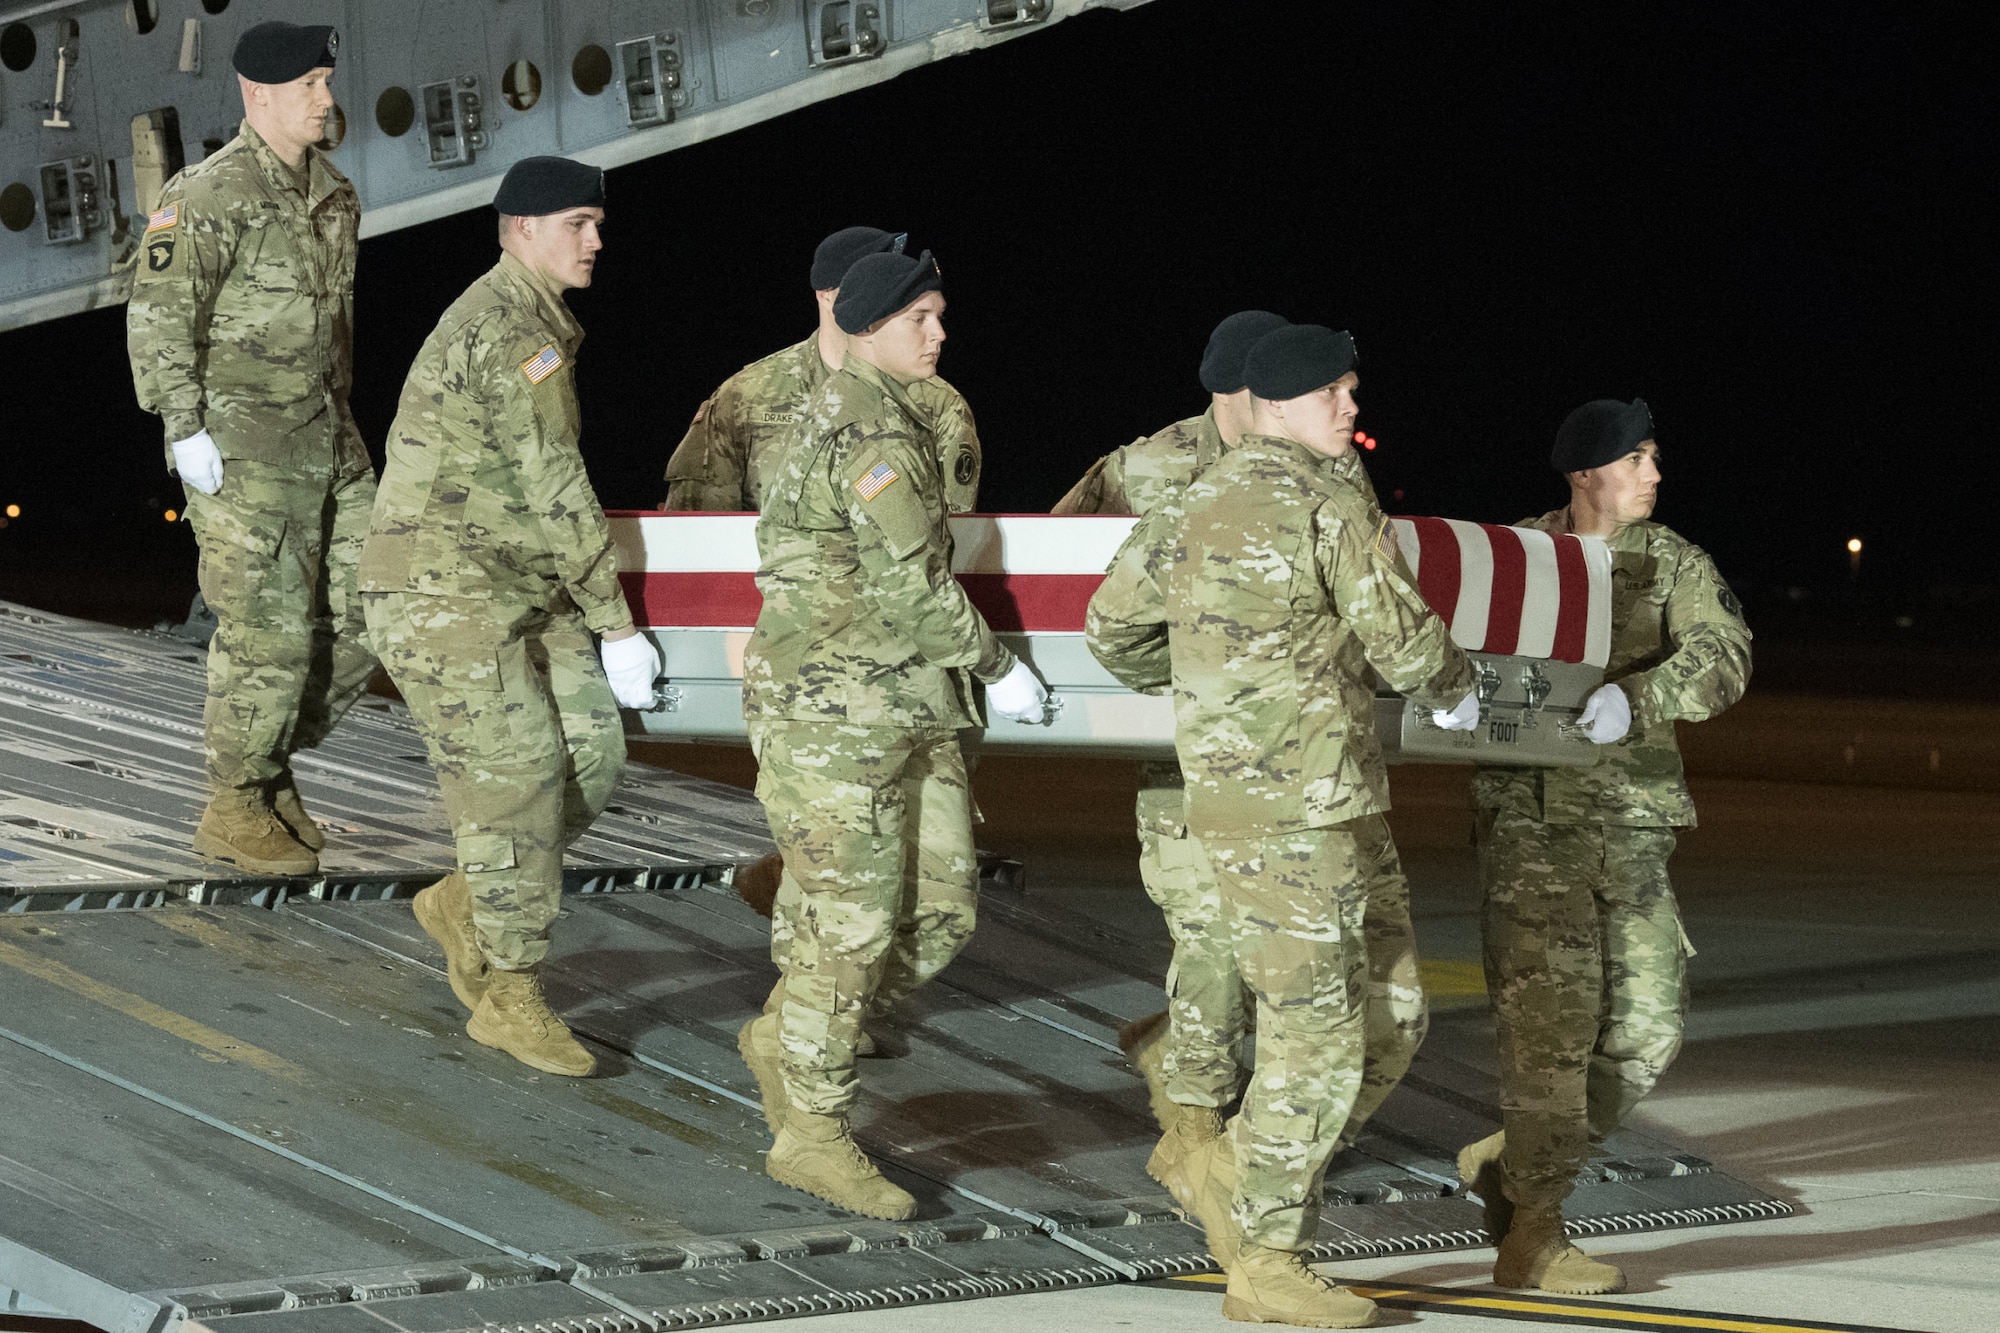 A U.S. Army carry team transfers the remains of Spc. Branden T. Kimball, of Central Point, Ore., Feb. 14, 2020 at Dover Air Force Base, Del. Kimball was assigned to 3rd Battalion, 10th Aviation Regiment, 10th Combat Aviation Brigade, Fort Drum, N.Y. (U.S. Air Force Photo by Mauricio Campino)